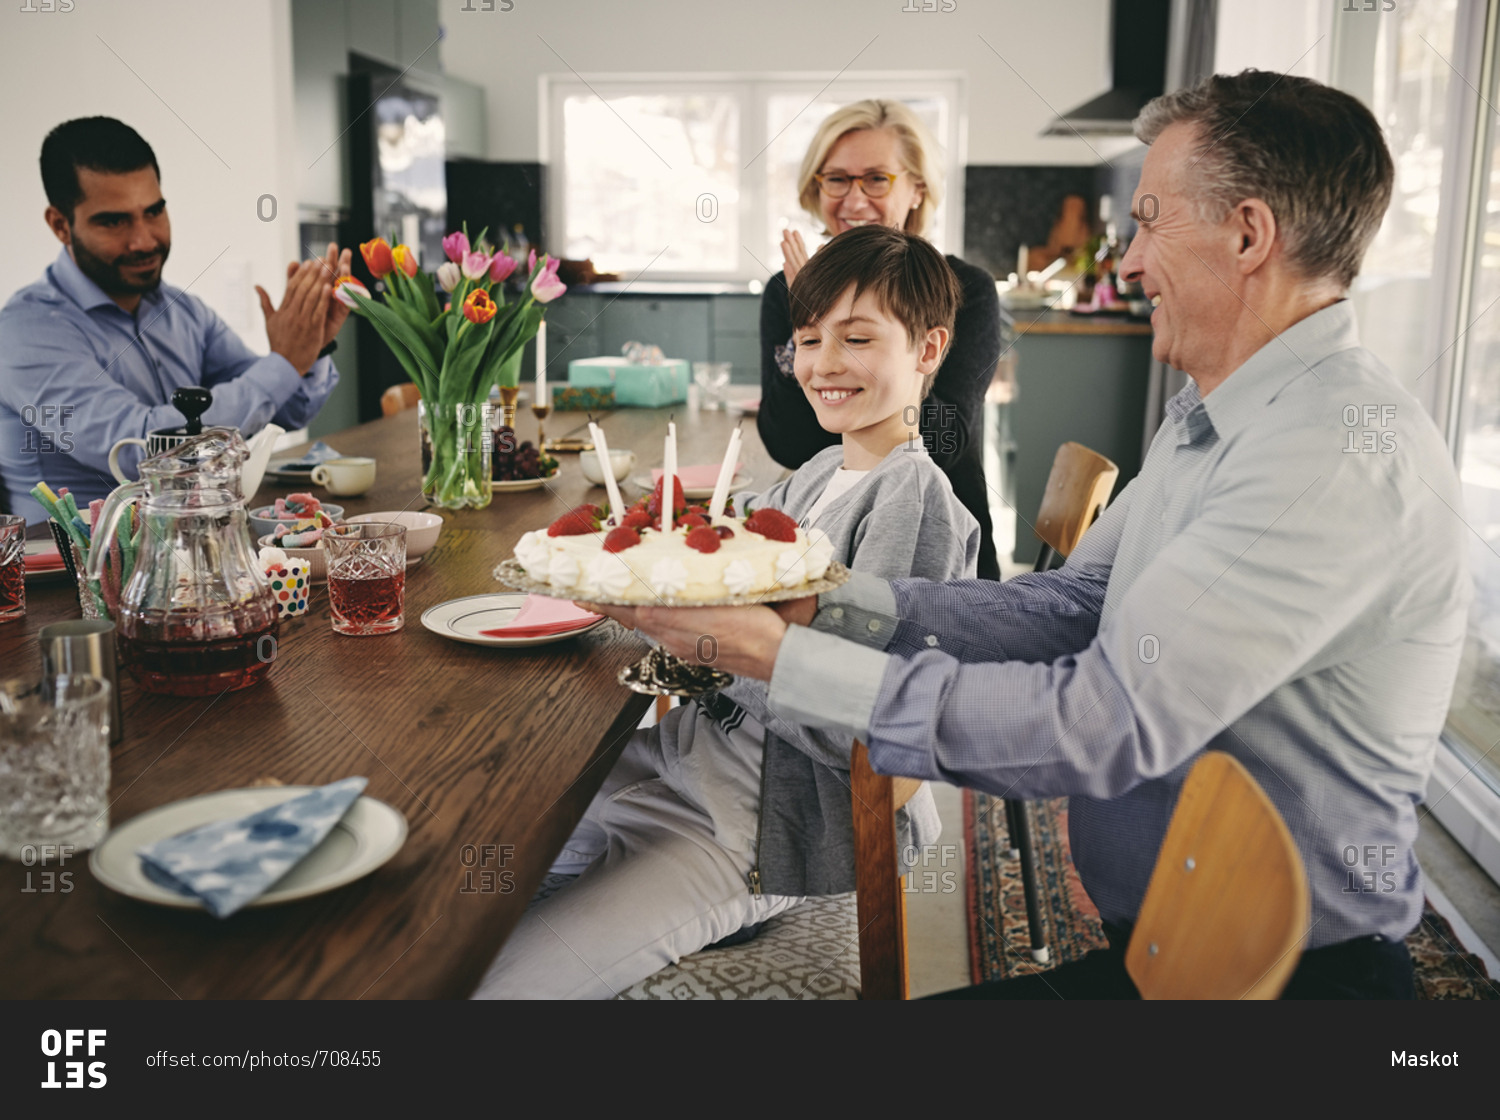 Smiling boy with grandparents and father with birthday cake at table